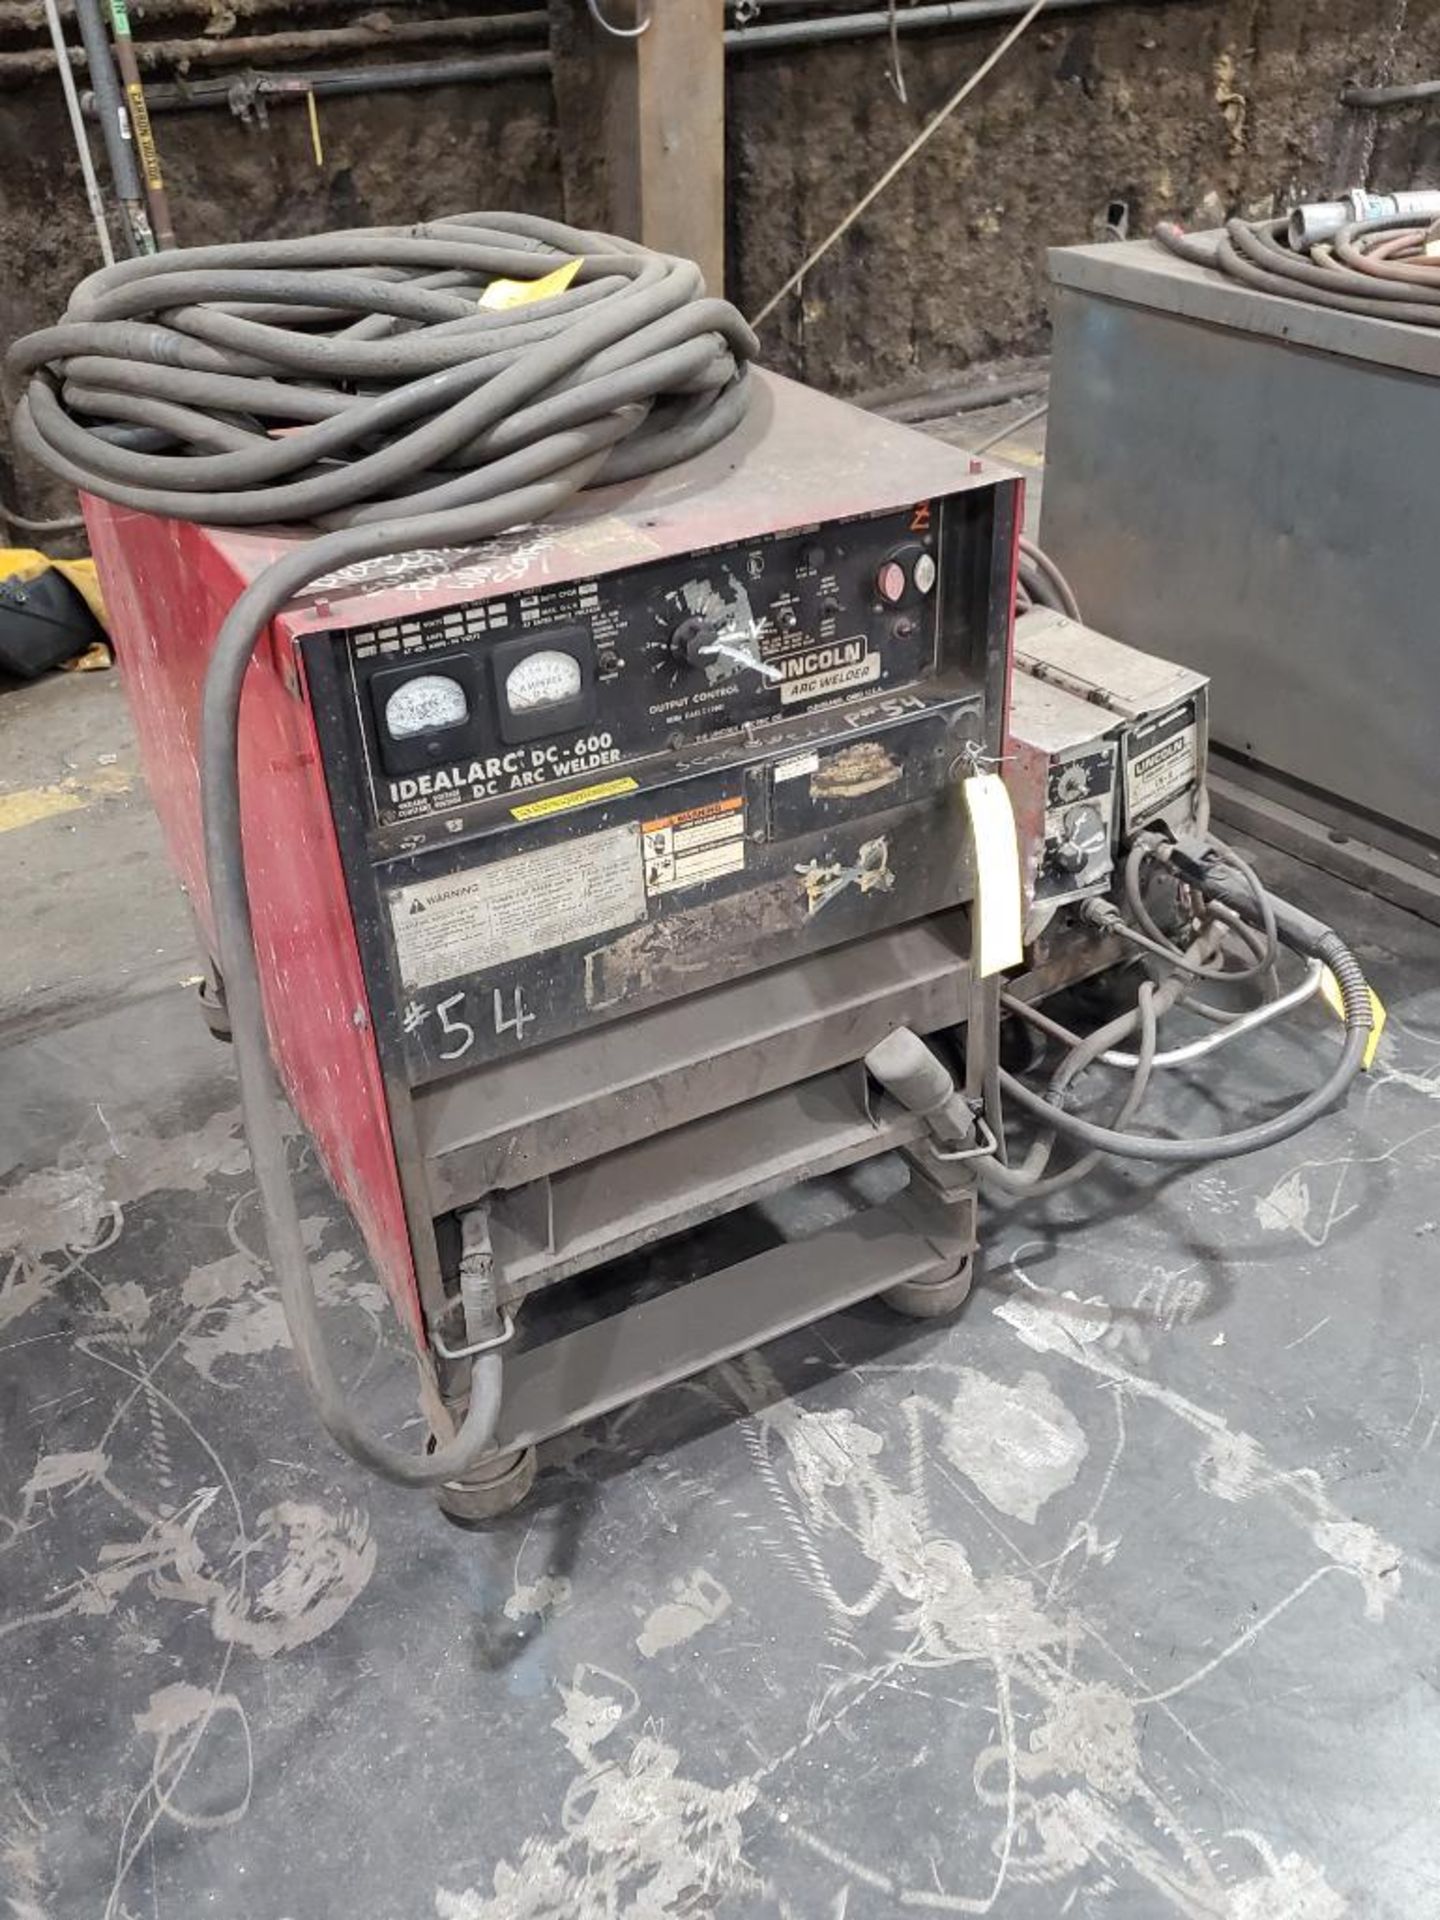 LINCOLN ELECTRIC IDEALARC DC-600 WELDER SN.AC819957 230-460V WITH LN-8 WIRE FEED SN.110270 115V - Image 2 of 6